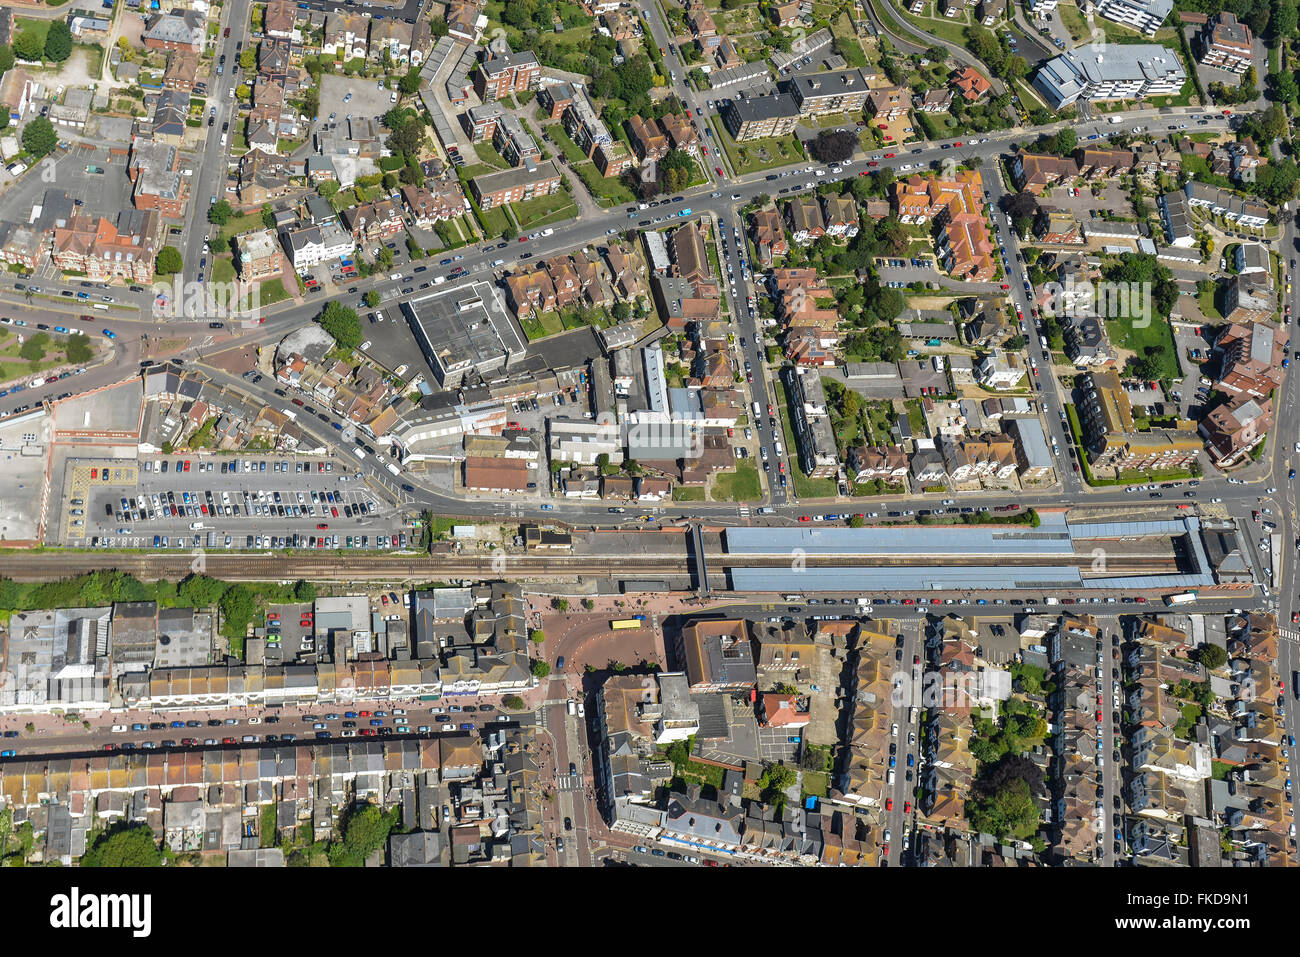 An aerial view of the railway station and surroundings of Bexhill on Sea, East Sussex Stock Photo